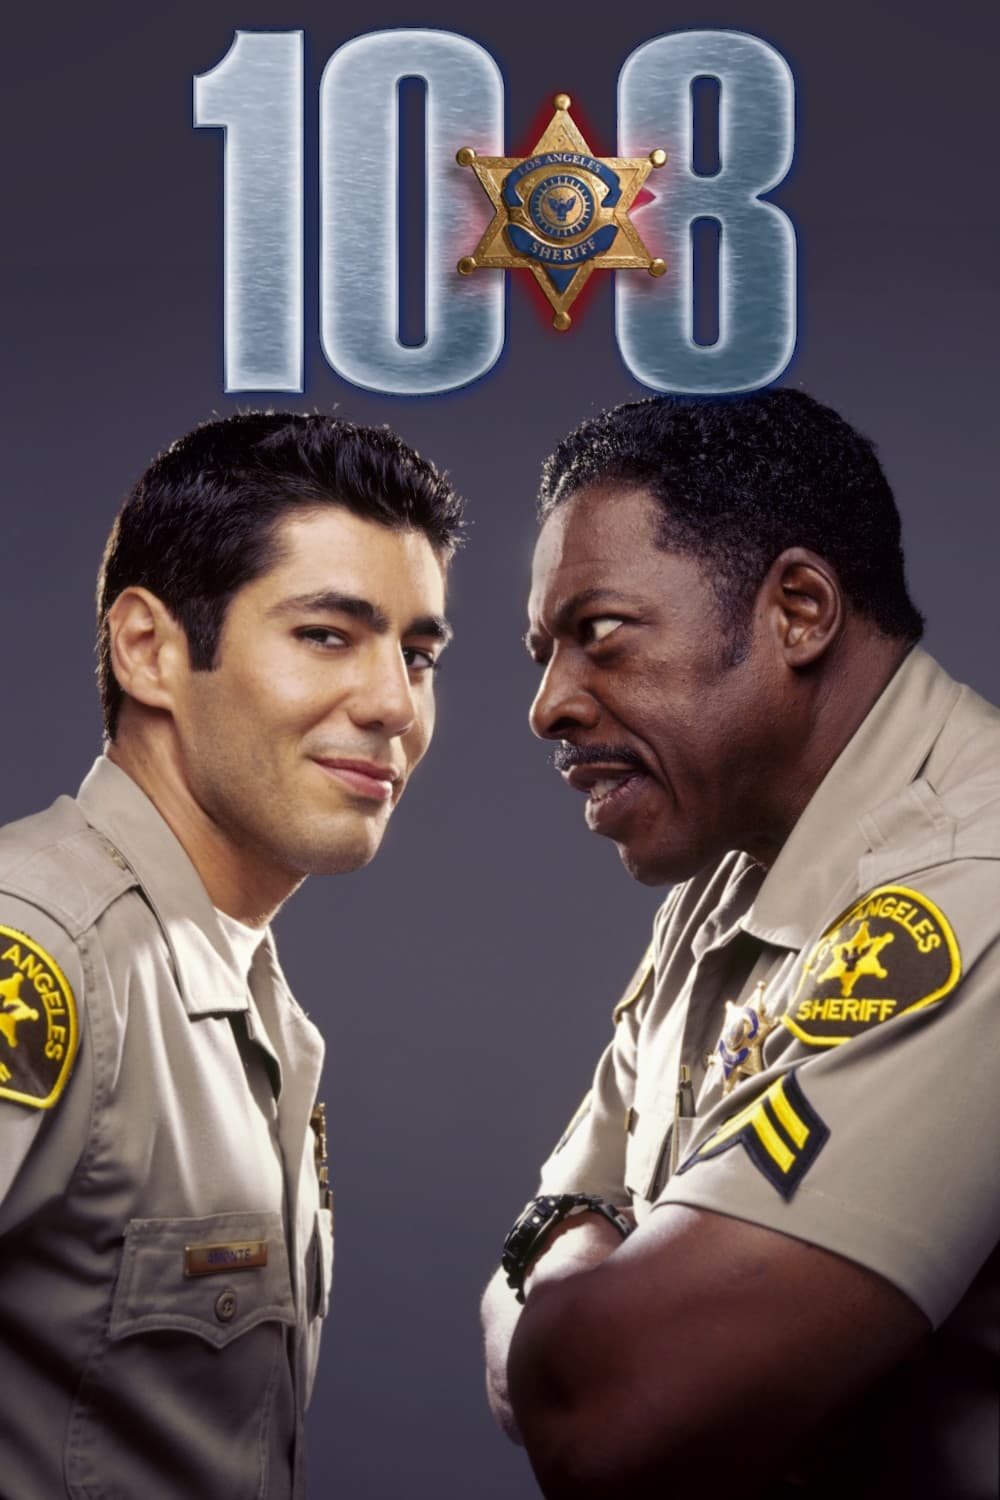 10-8: Officers on Duty (2003)